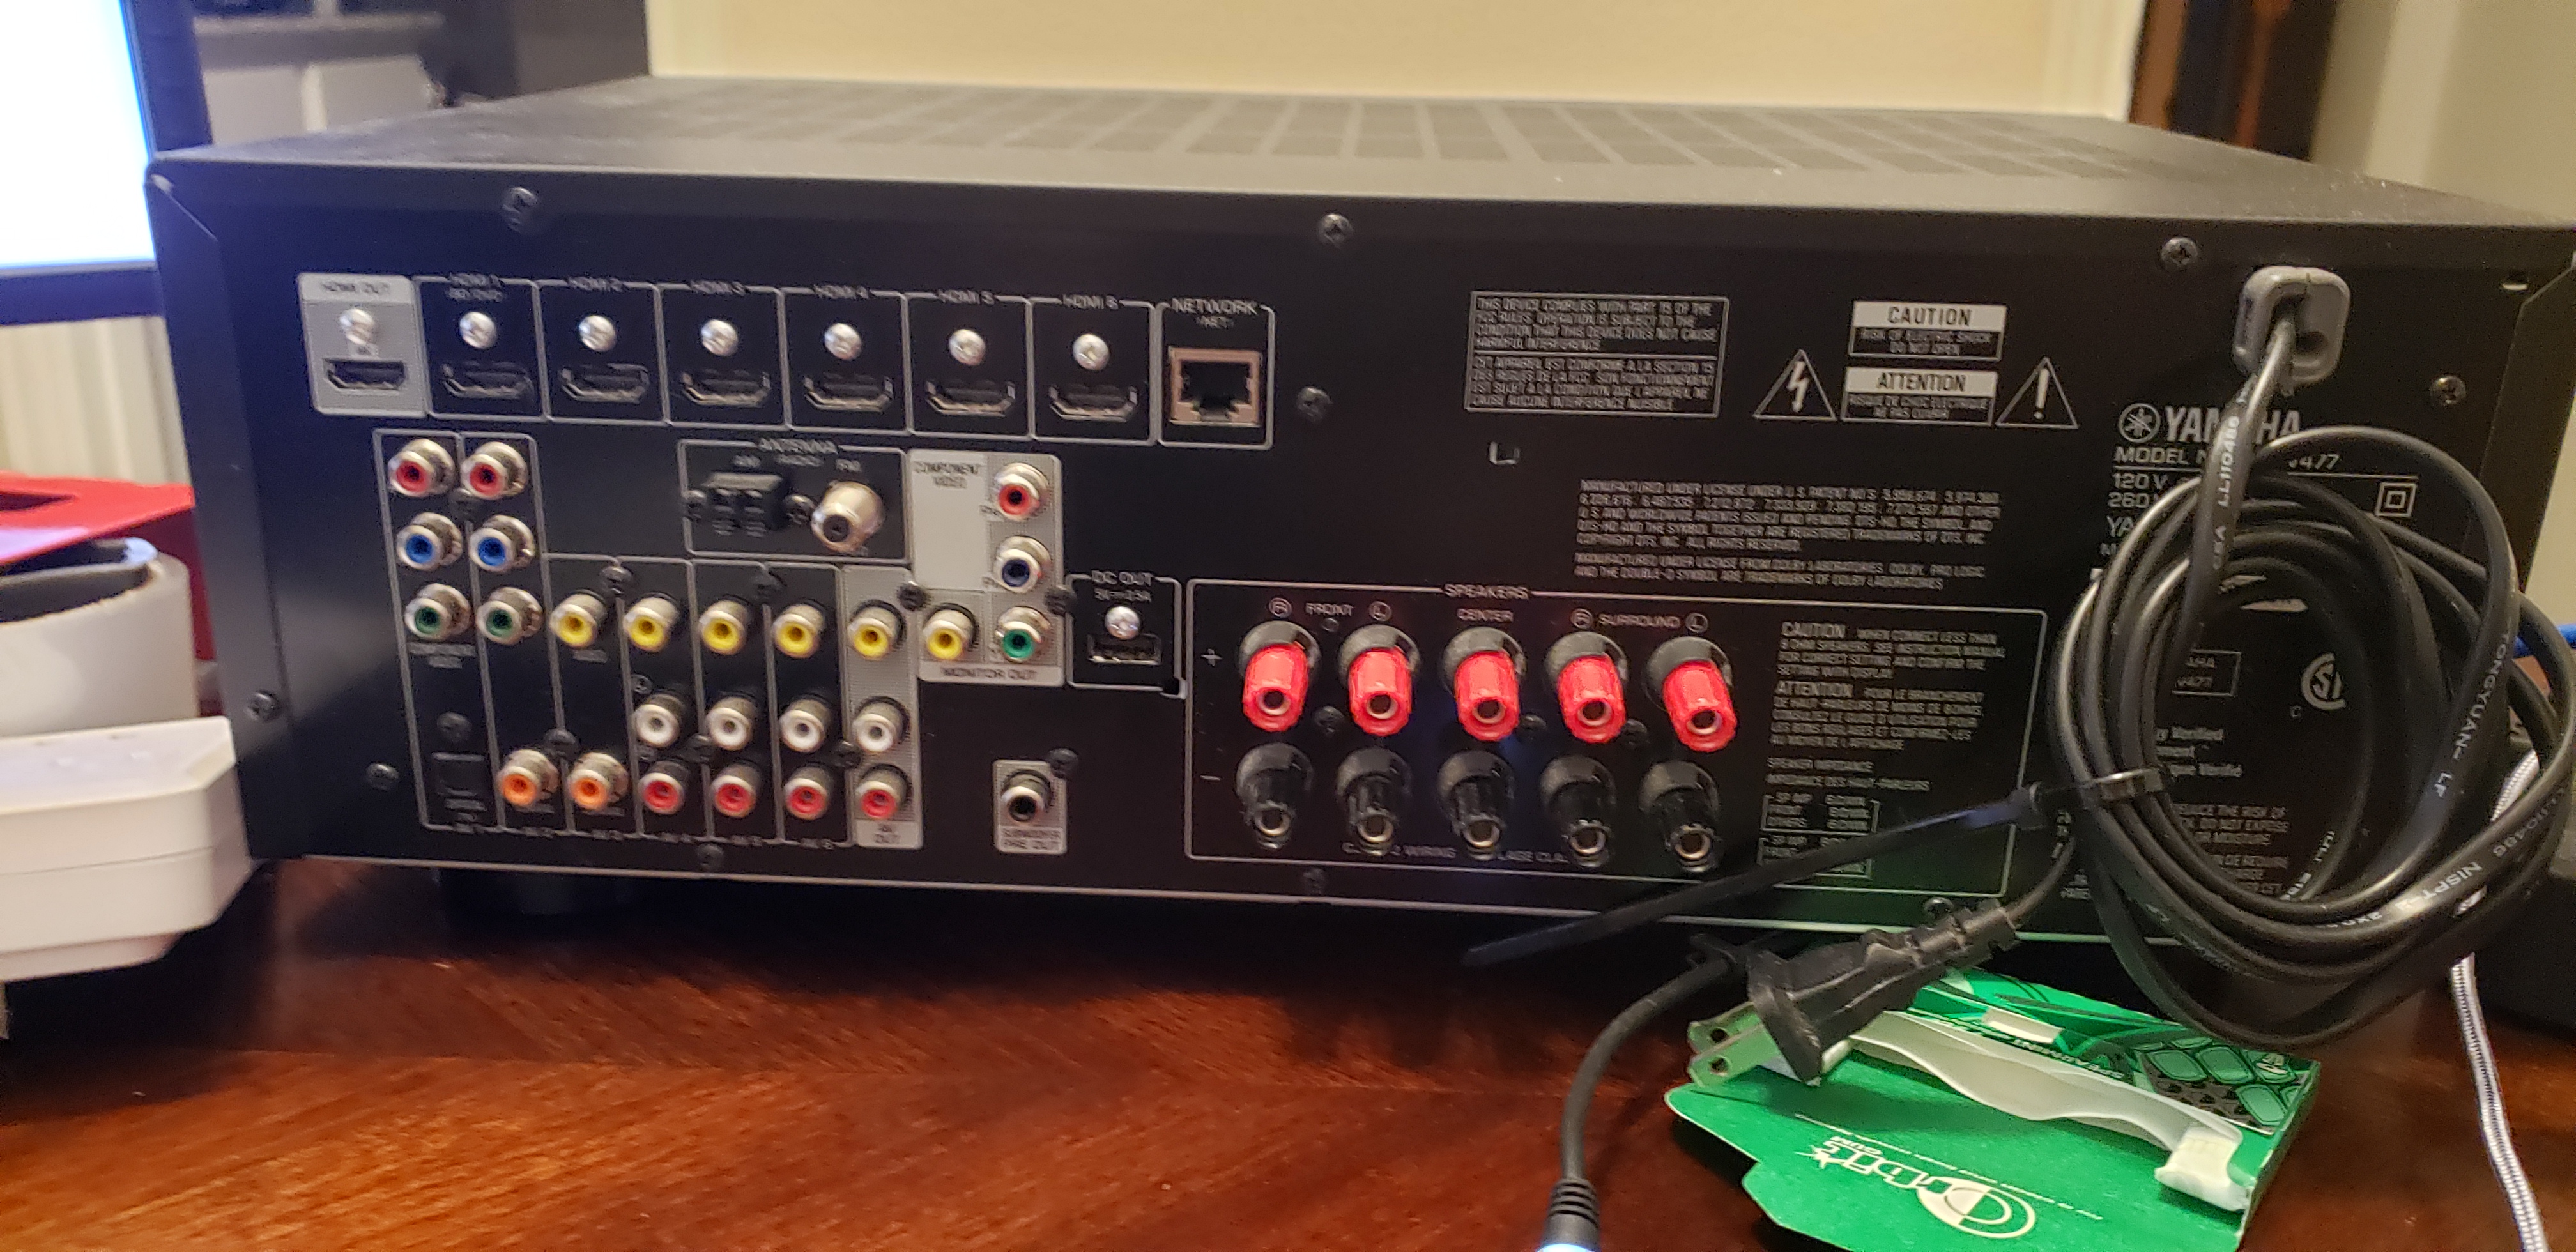 FOR SALE: Yamaha RX-V477 4K 5.1 A/V Receiver $150.00 OBO | Home Theater  Forum